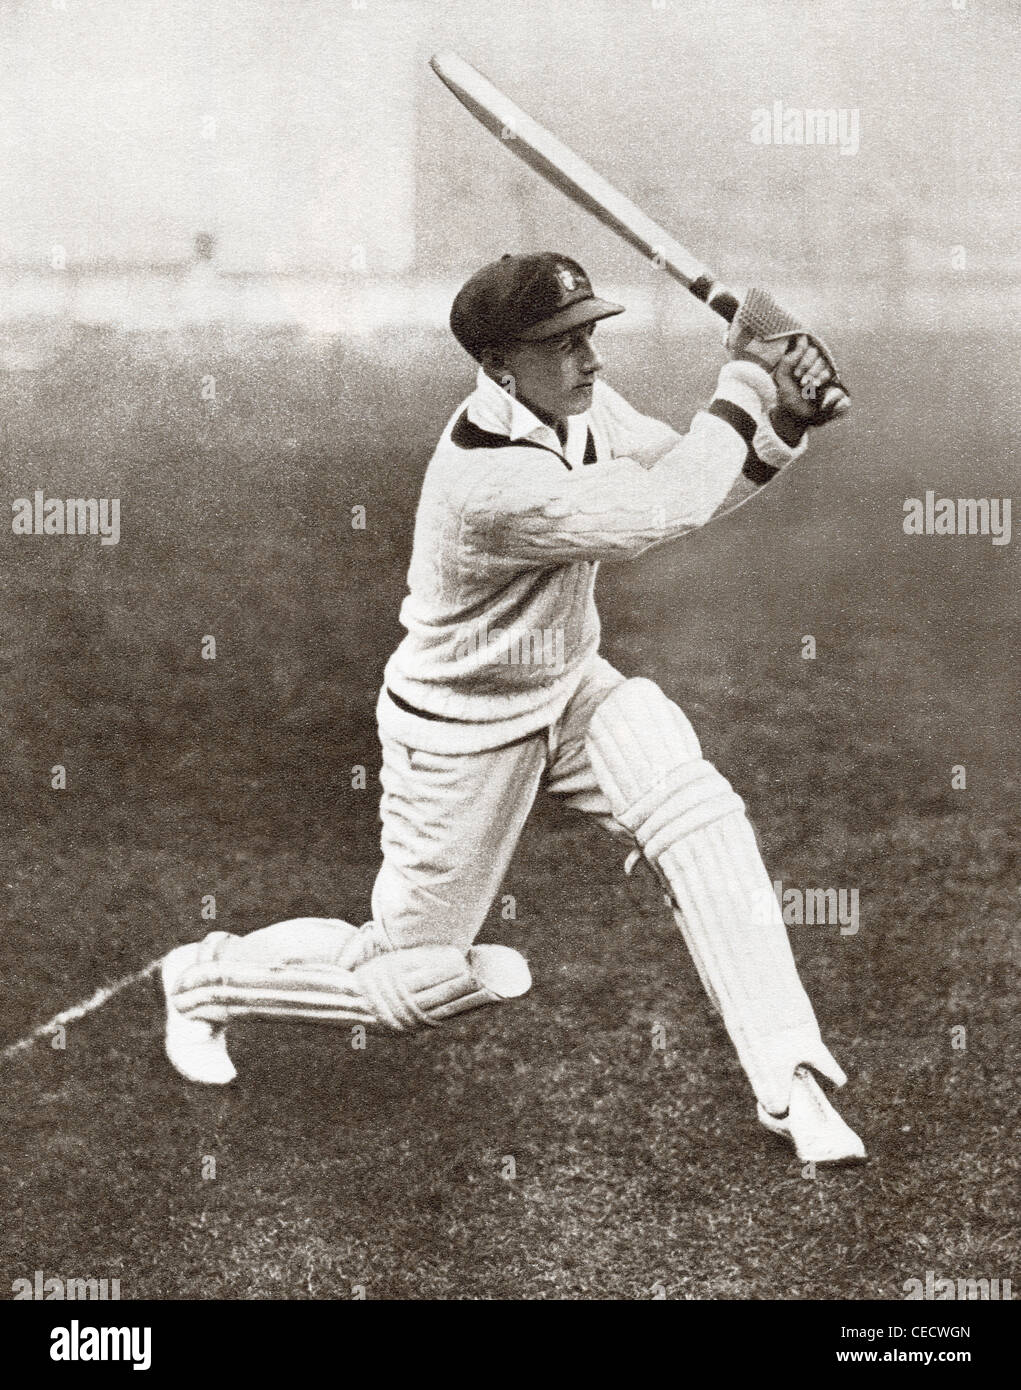 Sir Donald George Bradman, 1908 – 2001, often referred to as 'The Don'. Australian cricketer. Stock Photo